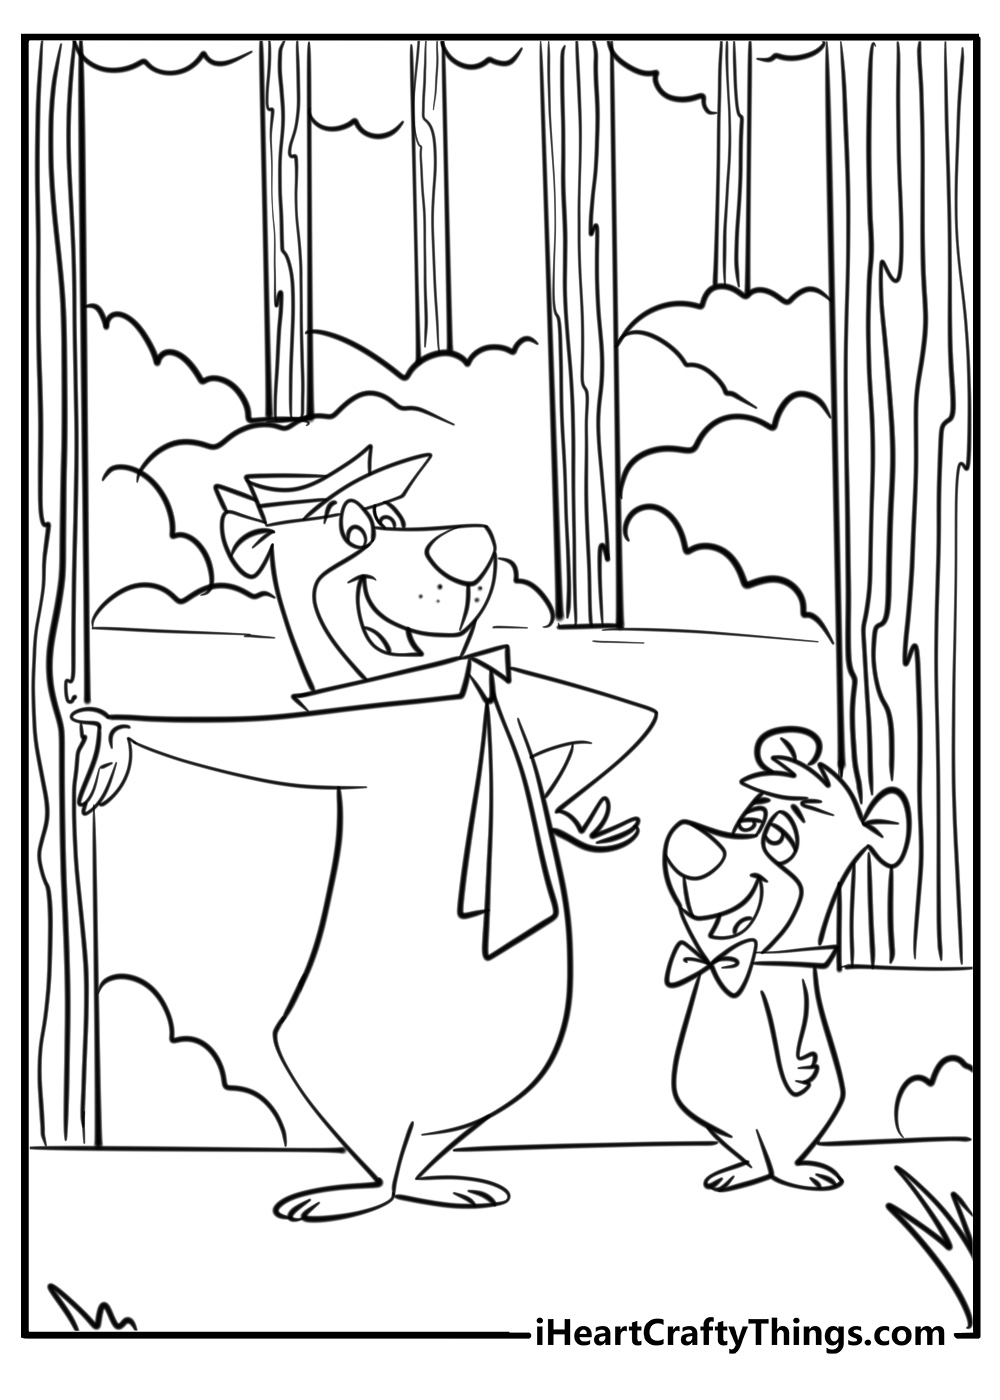 Bear coloring page of yogi with boo boo in the forest